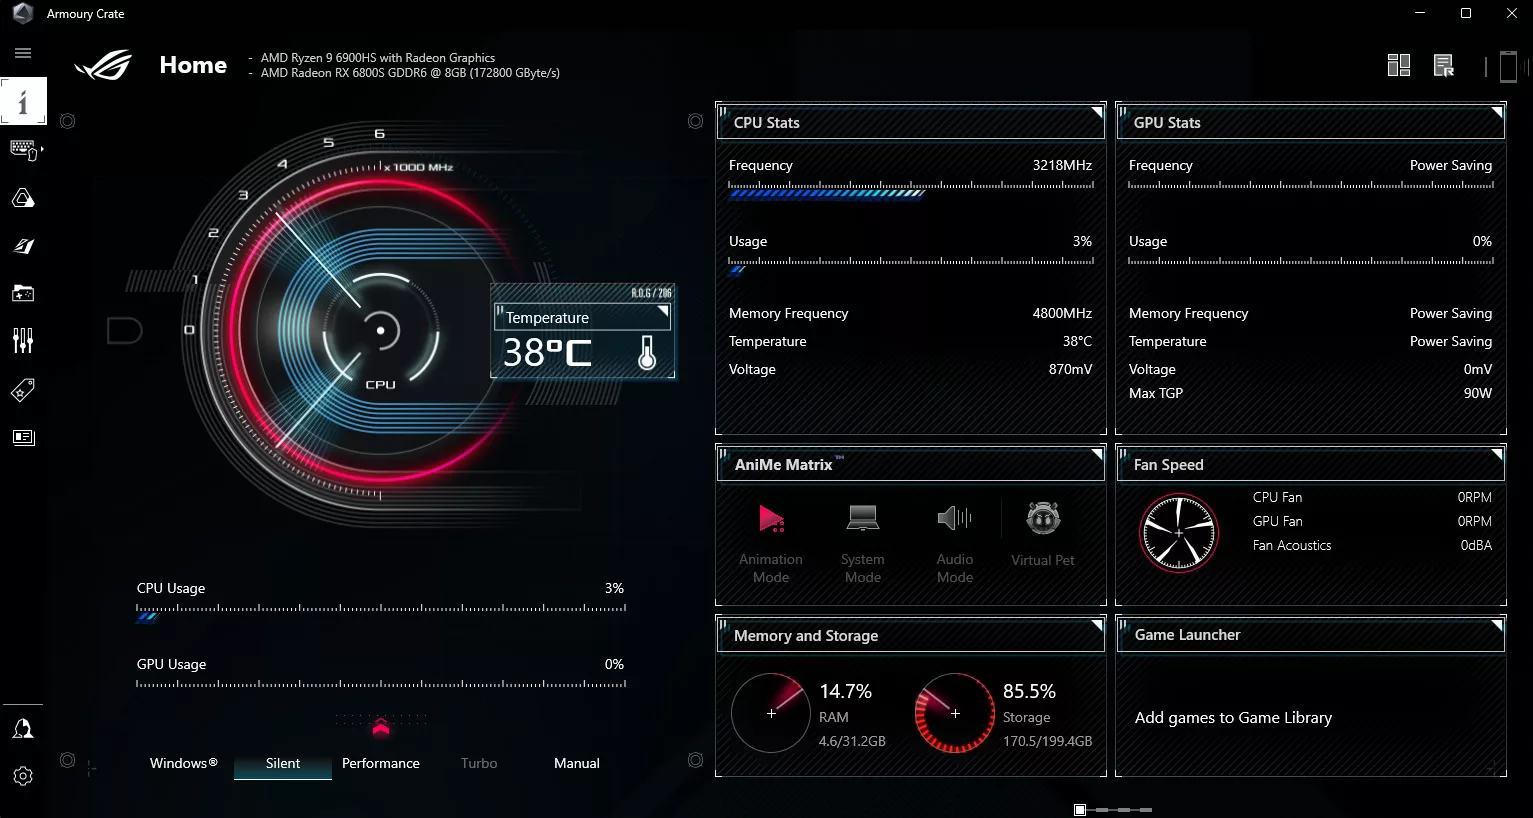 A screenshot of the Armoury Crate software, showing the current CPU and RAM configuration.